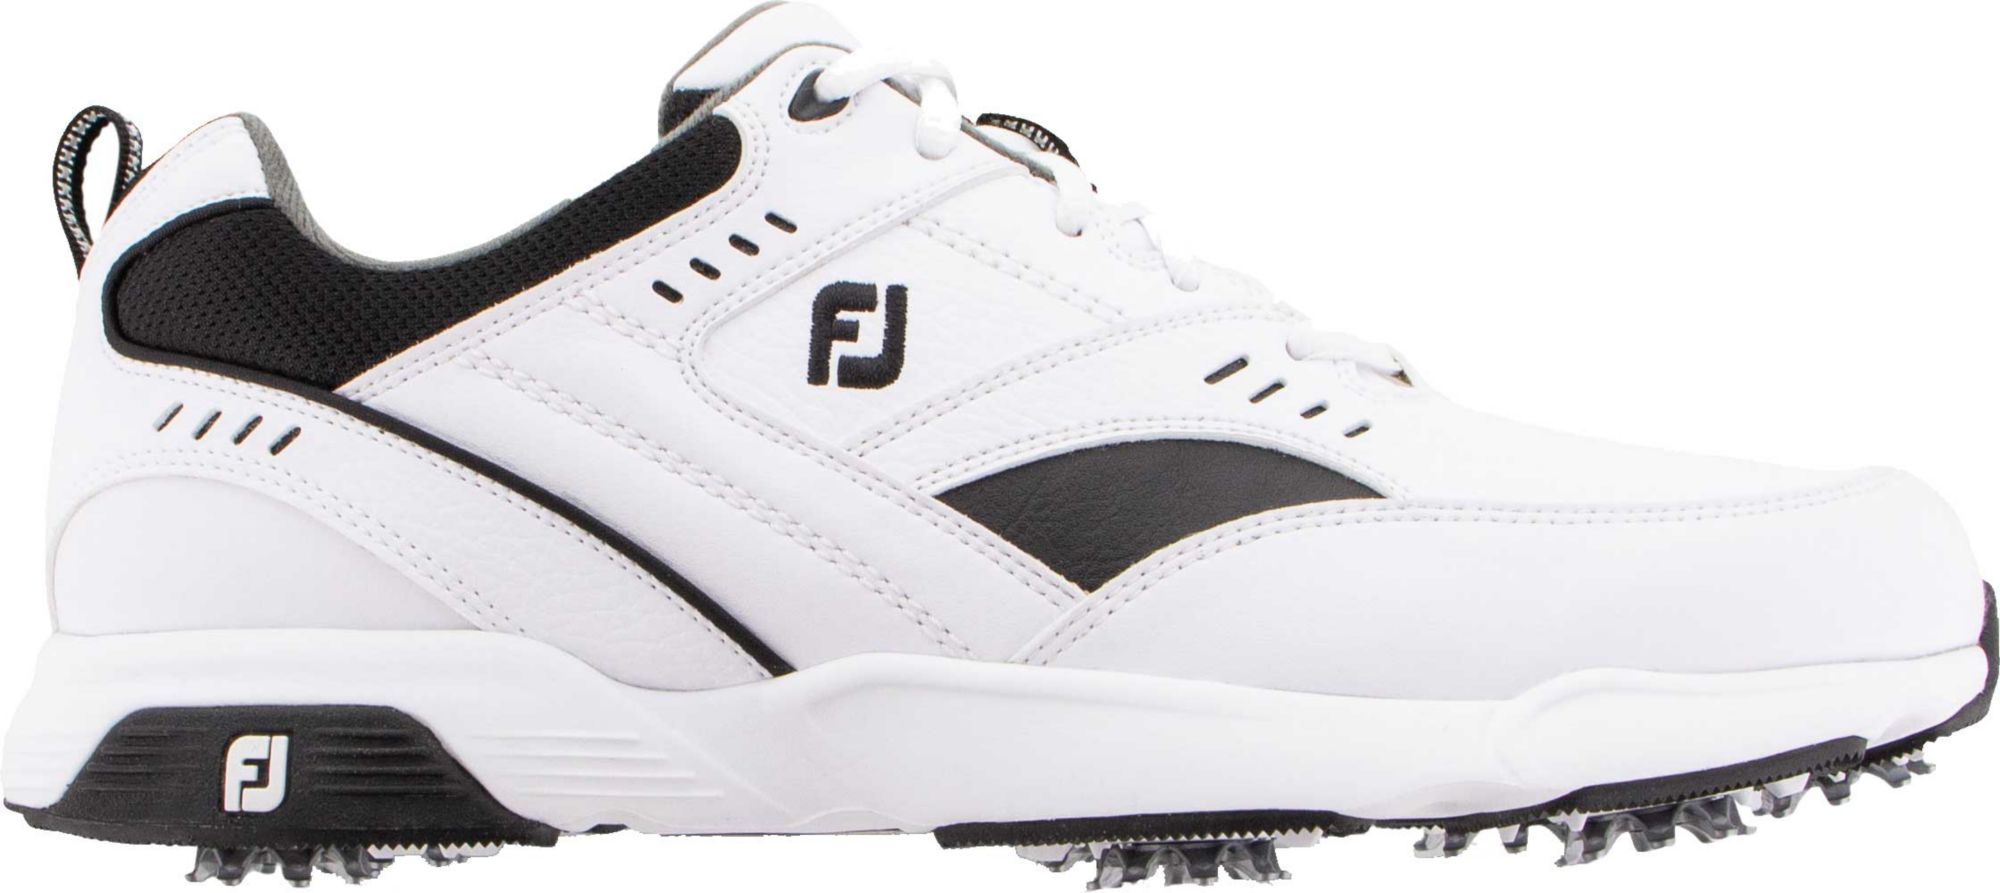 FootJoy Men's Specialty Golf Shoes - image 1 of 6